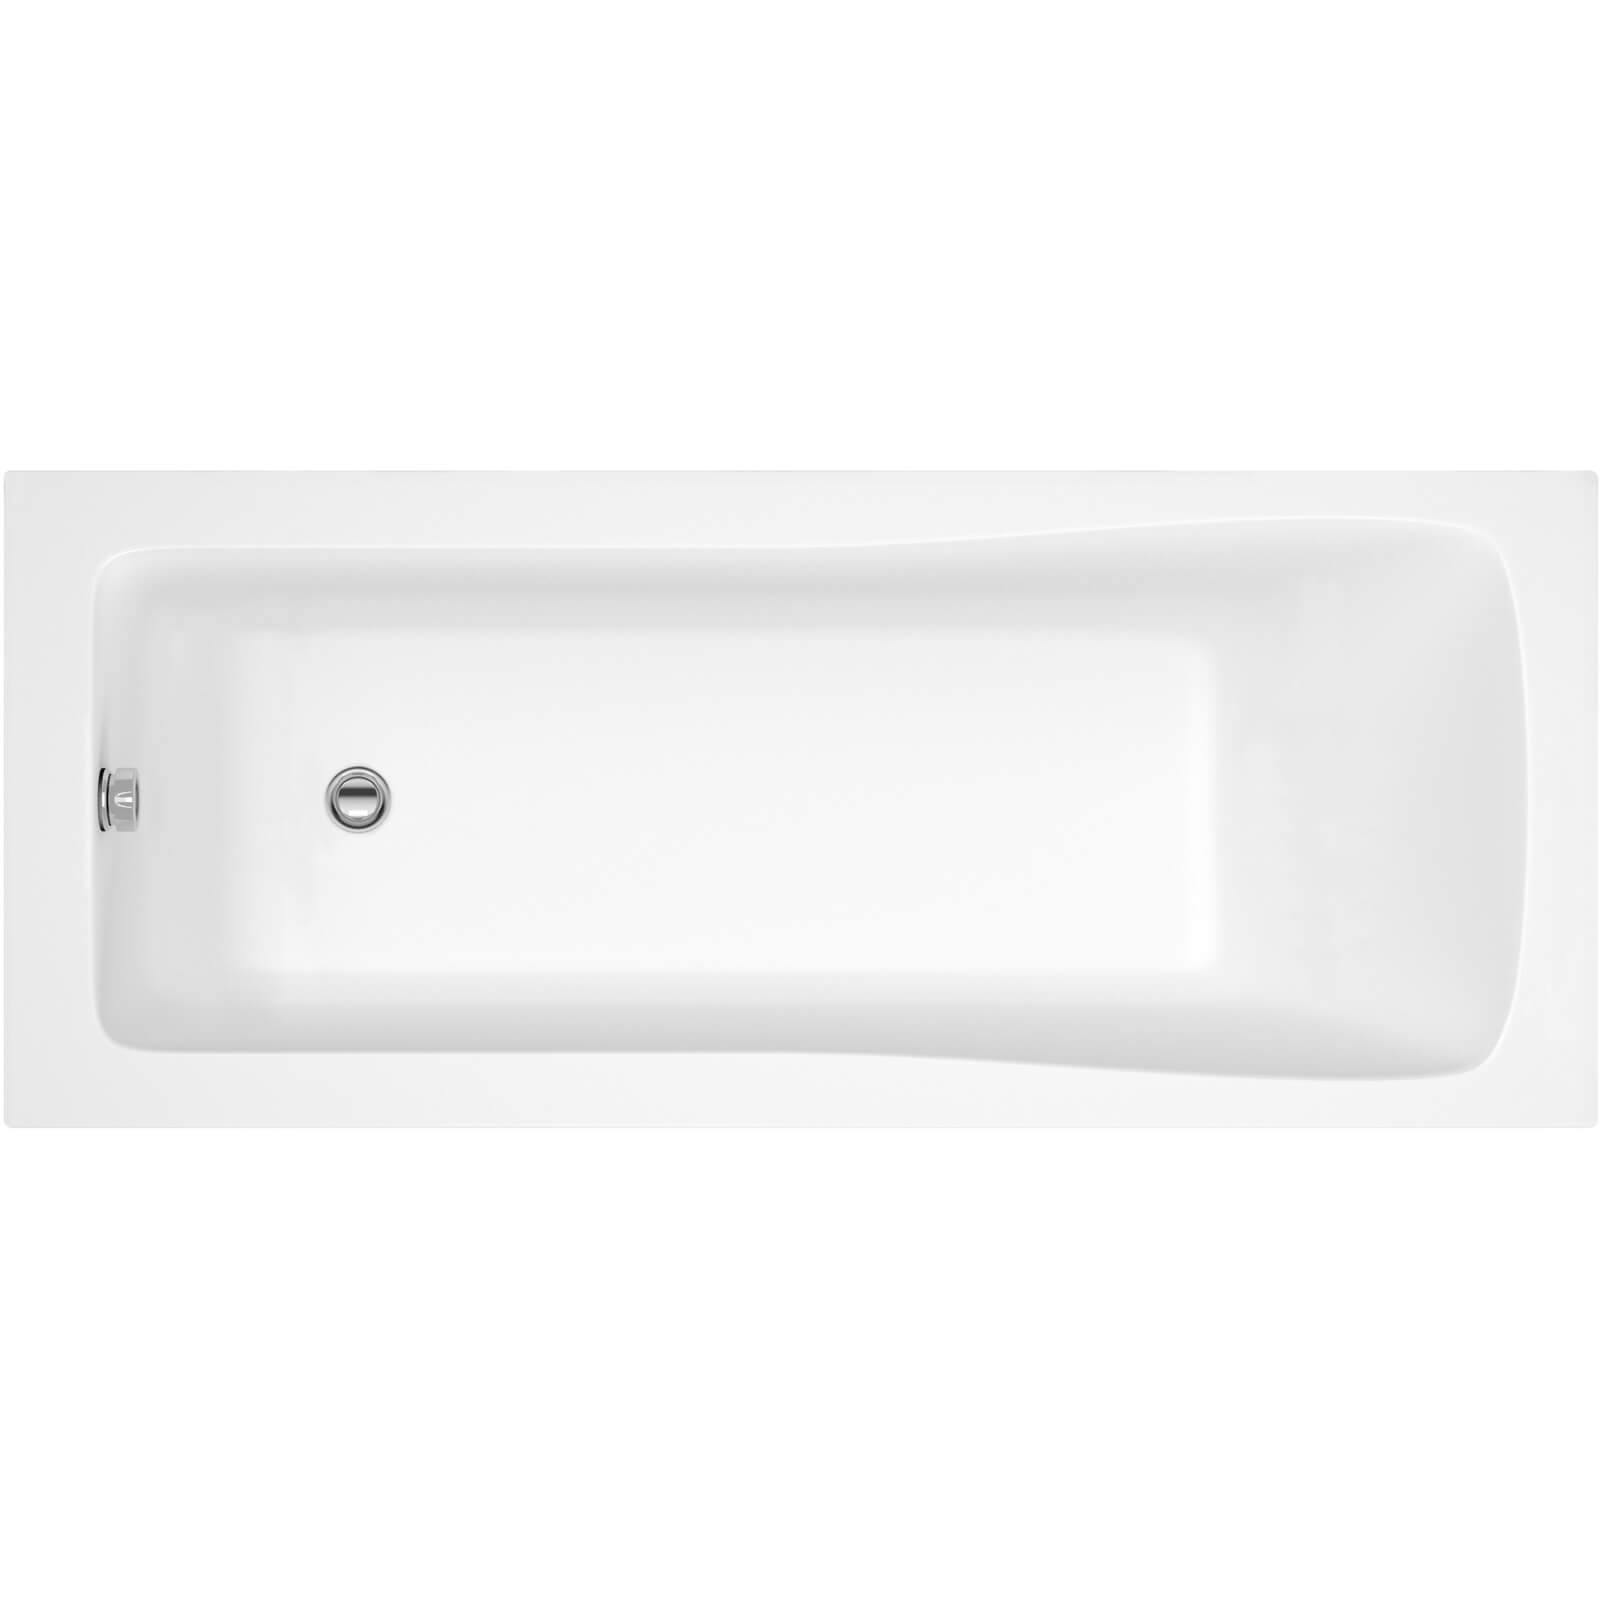 Balterley Square Single Ended Bath - 1600 x 700mm